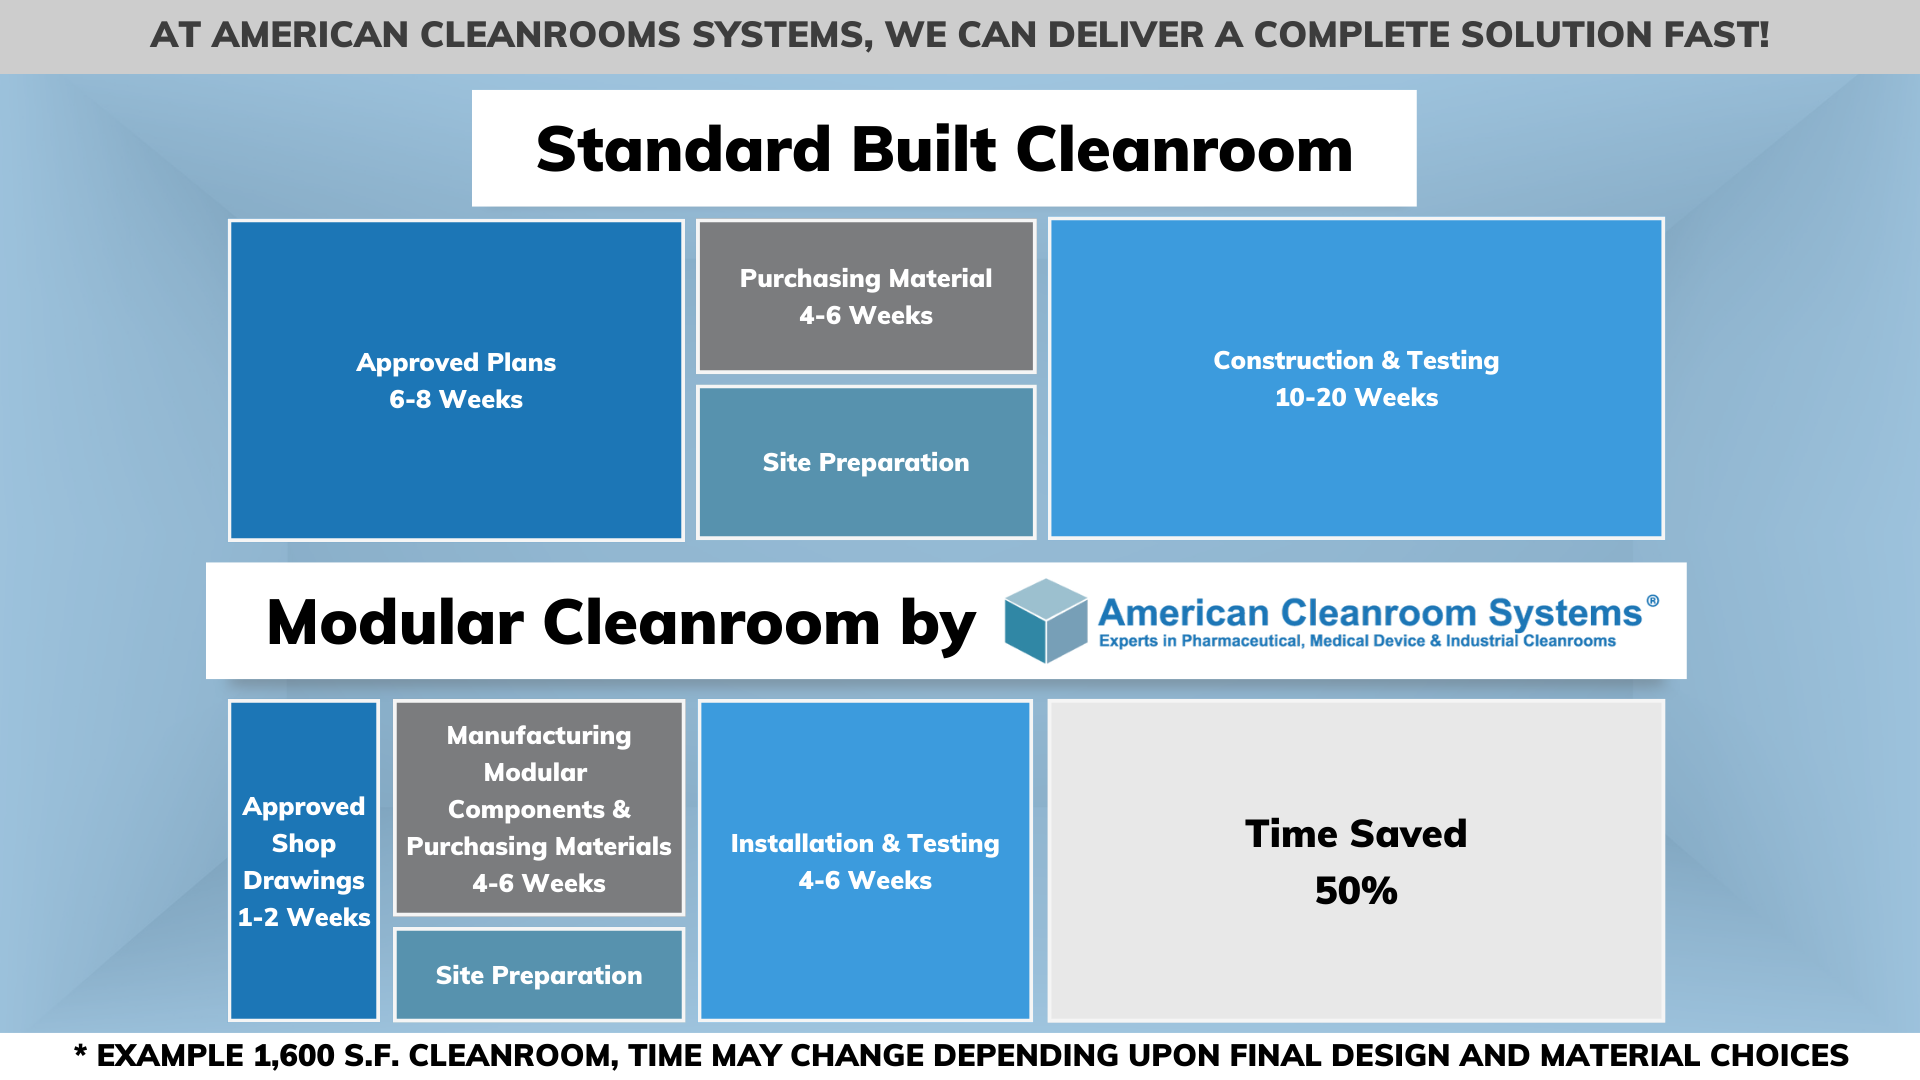 standard built lead time, modular cleanroom lead time, 50% time saved